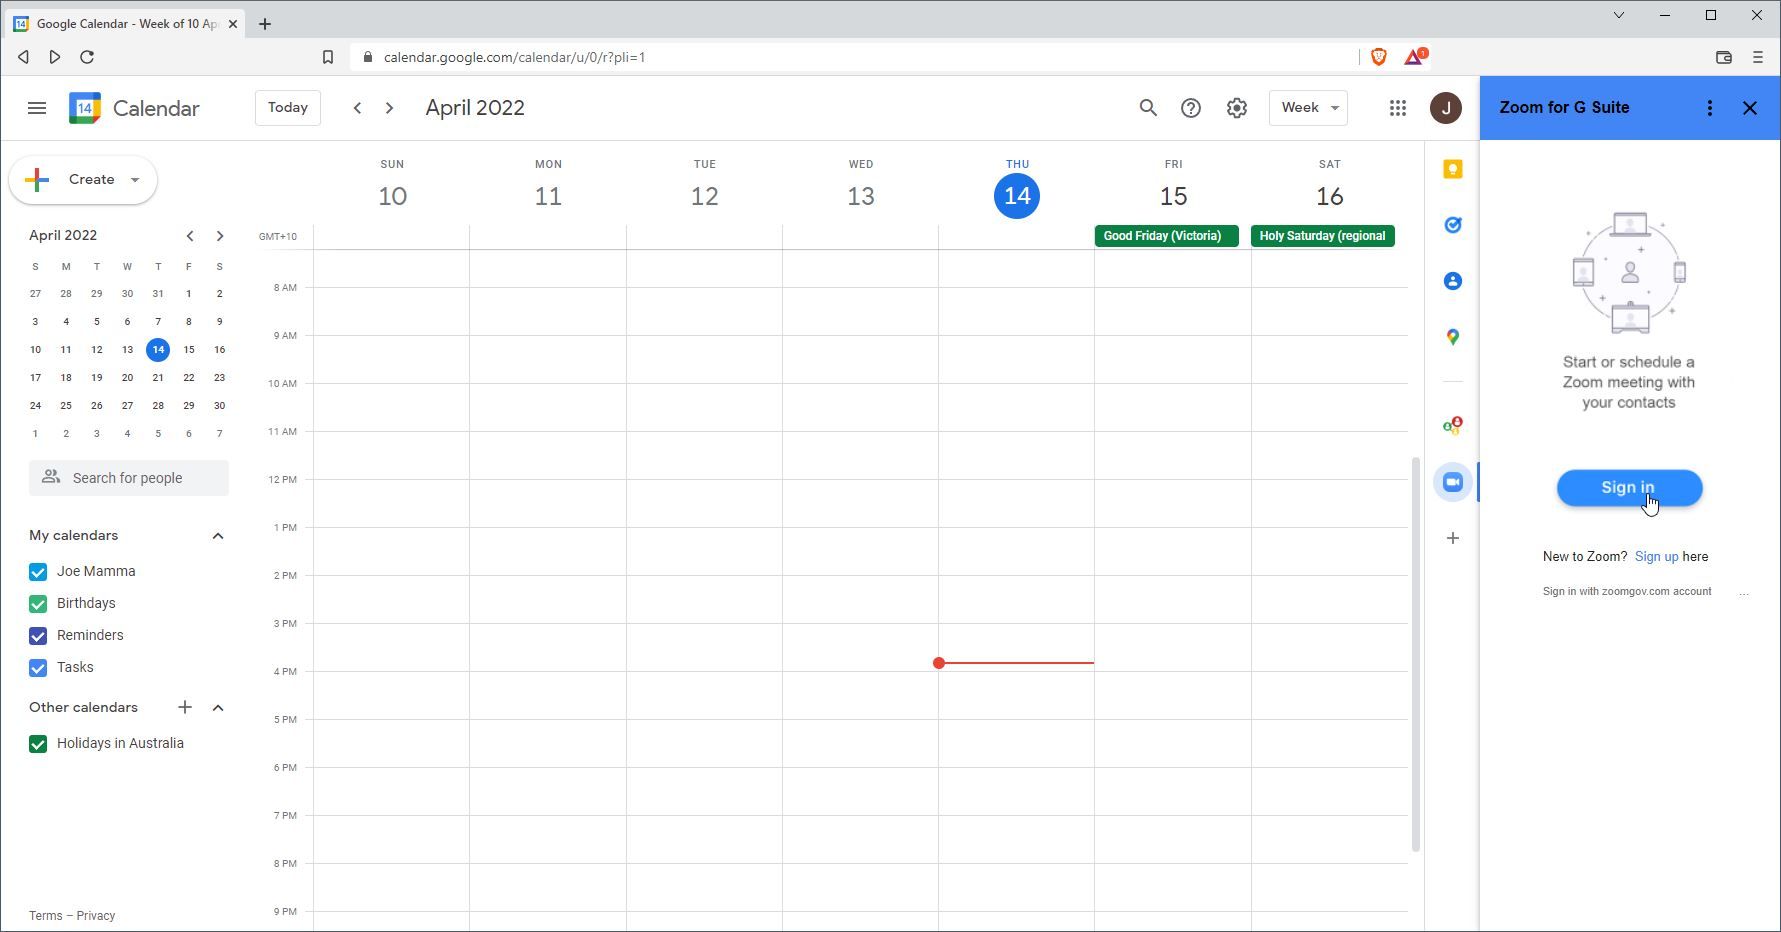 A Screenshot of Zoom for G Suite in Use